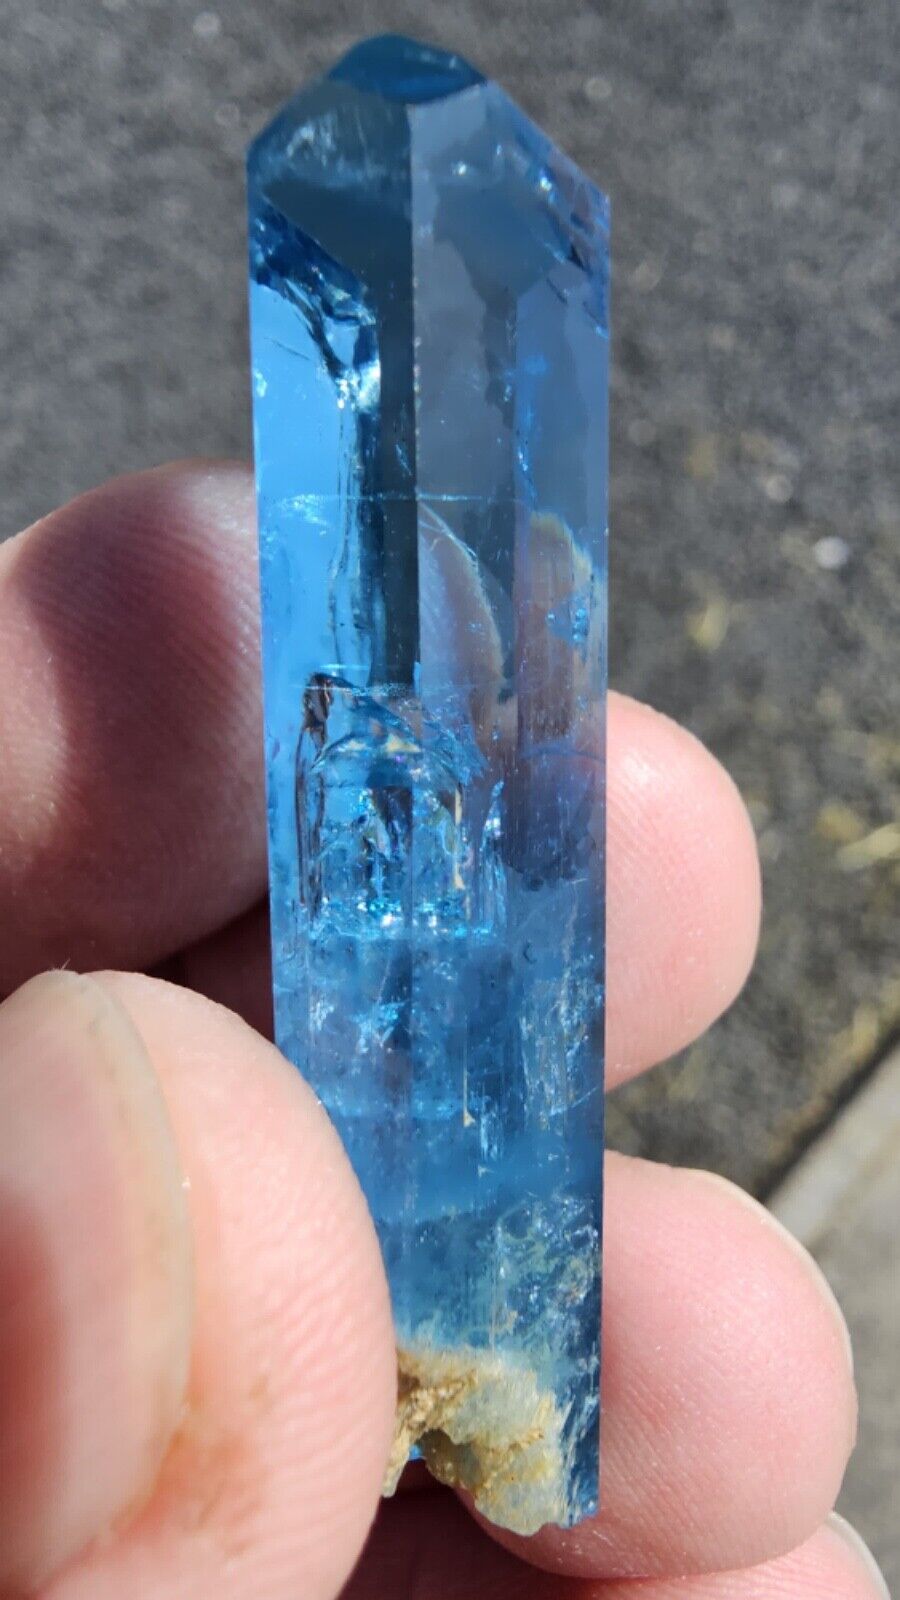 Aqua Marine Double Blue Colour (66ct) from Thuong Xuan District in Vietnam